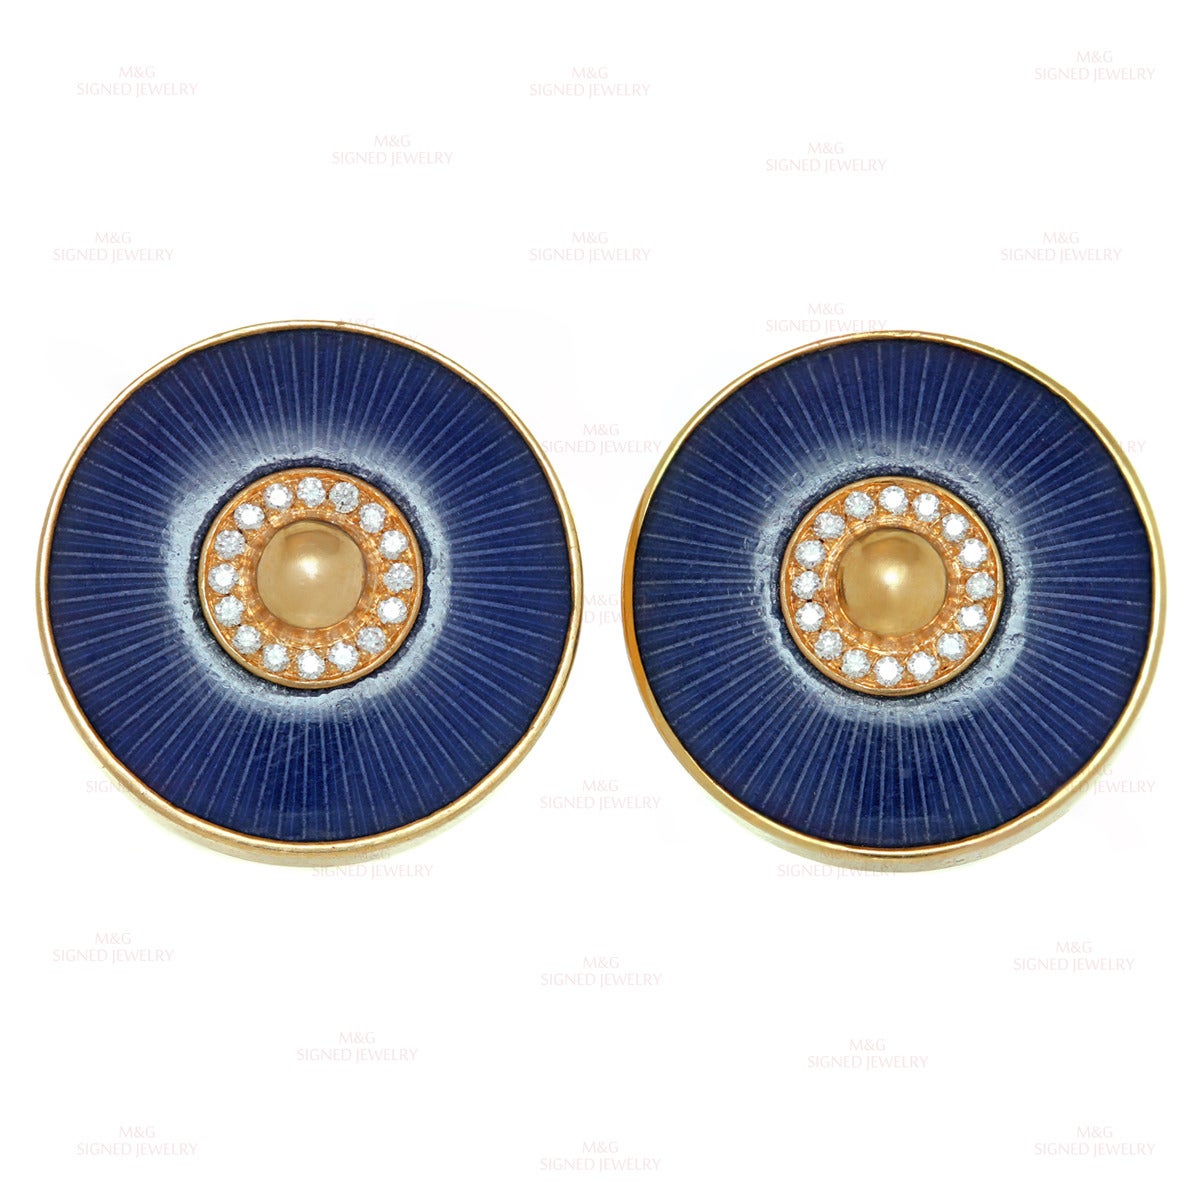 These stunning Cartier cufflinks from the Sunshade Decor collection are made in 18k rose gold and feature a round striped blue enamel design accented with brilliant-cut round E-F VVS2-VS1 diamond of an estimated 0.15 carats. Made in France.